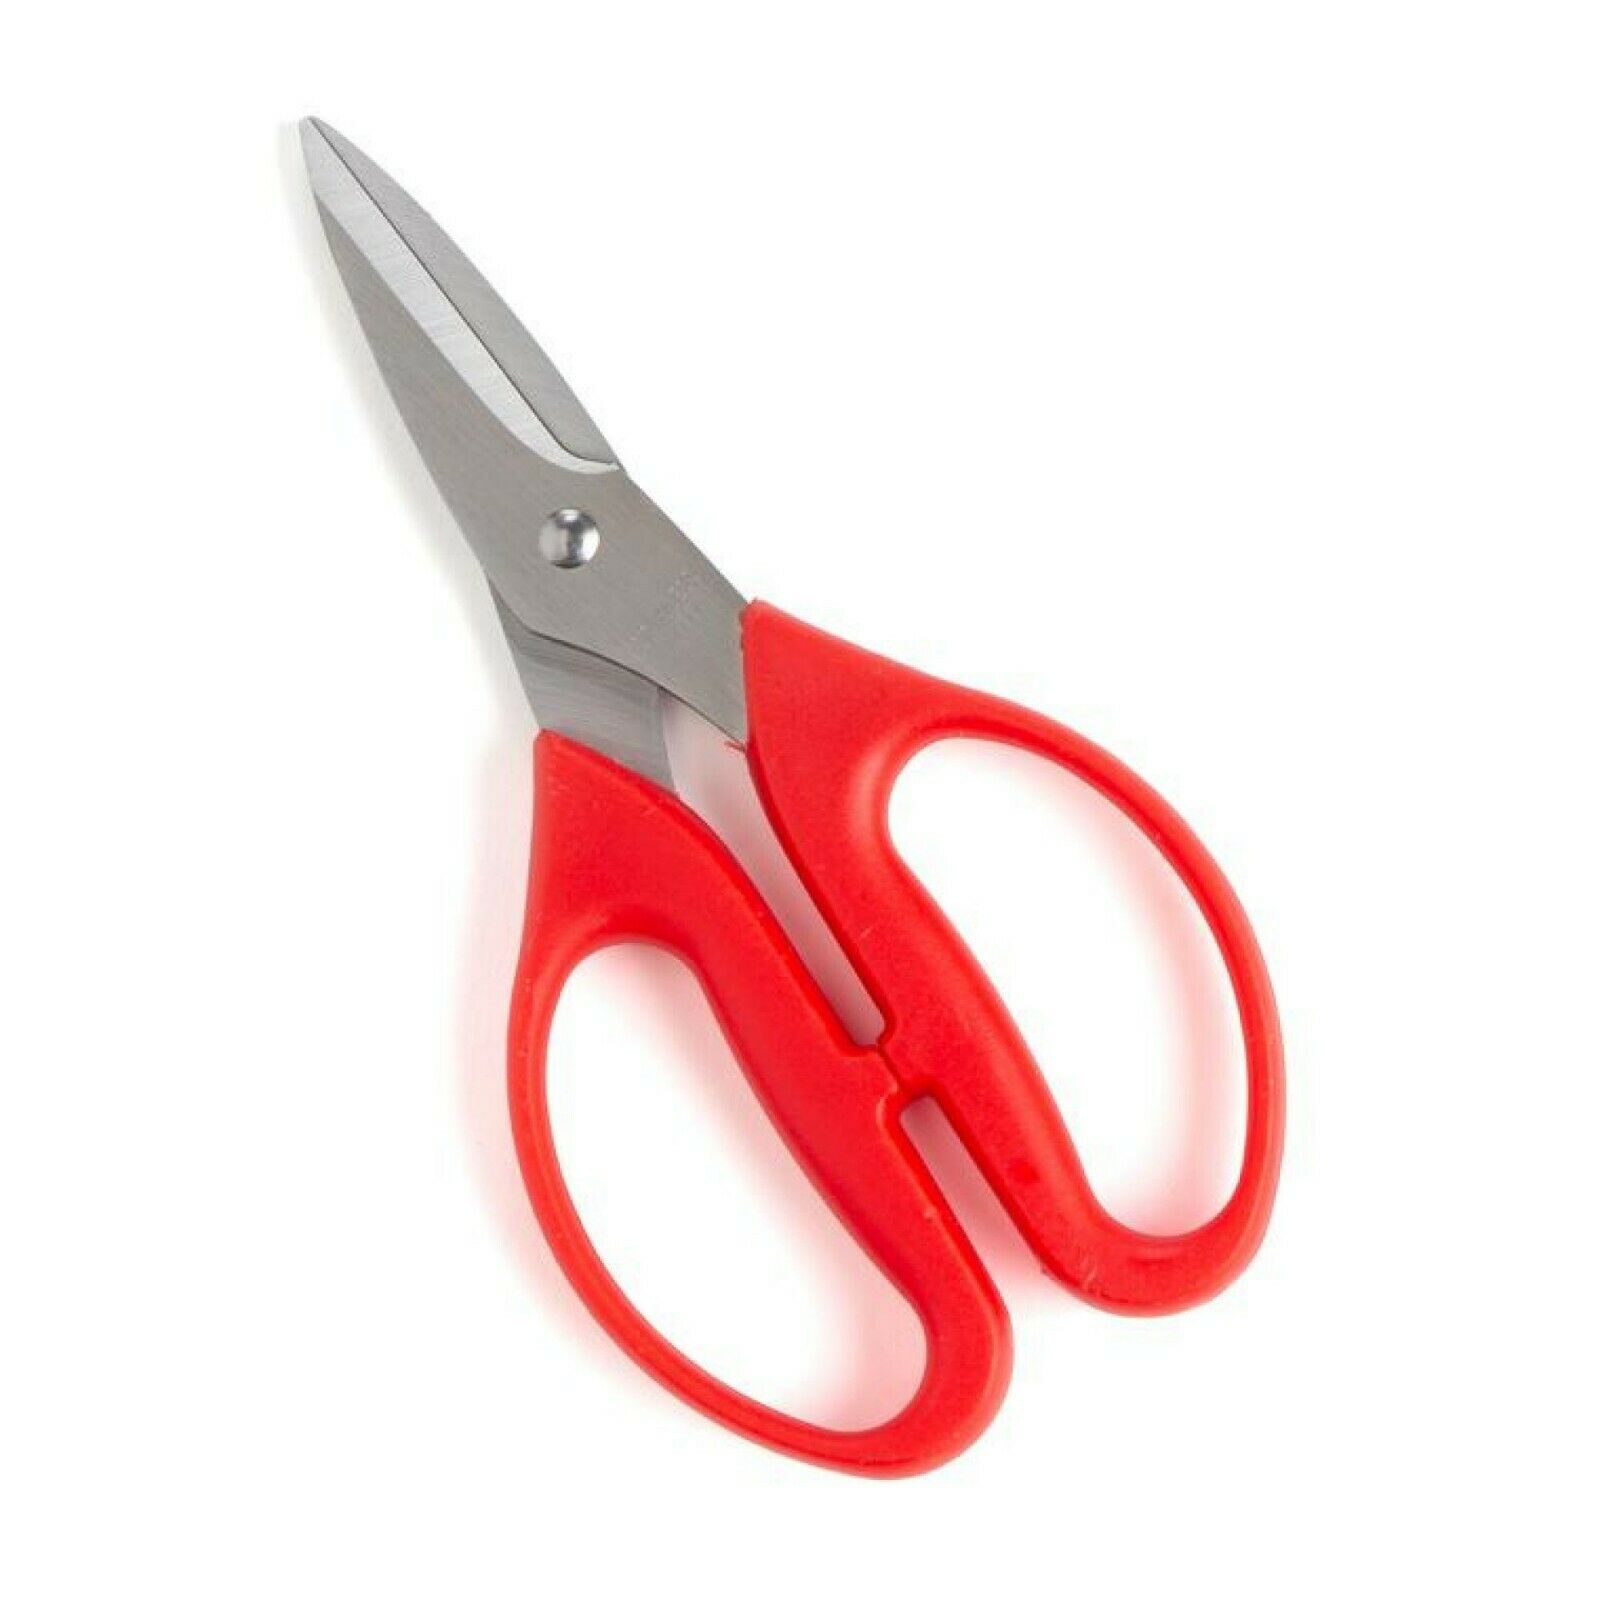 Leather Scissors 7" Long 3047-00 By Tandy Leather